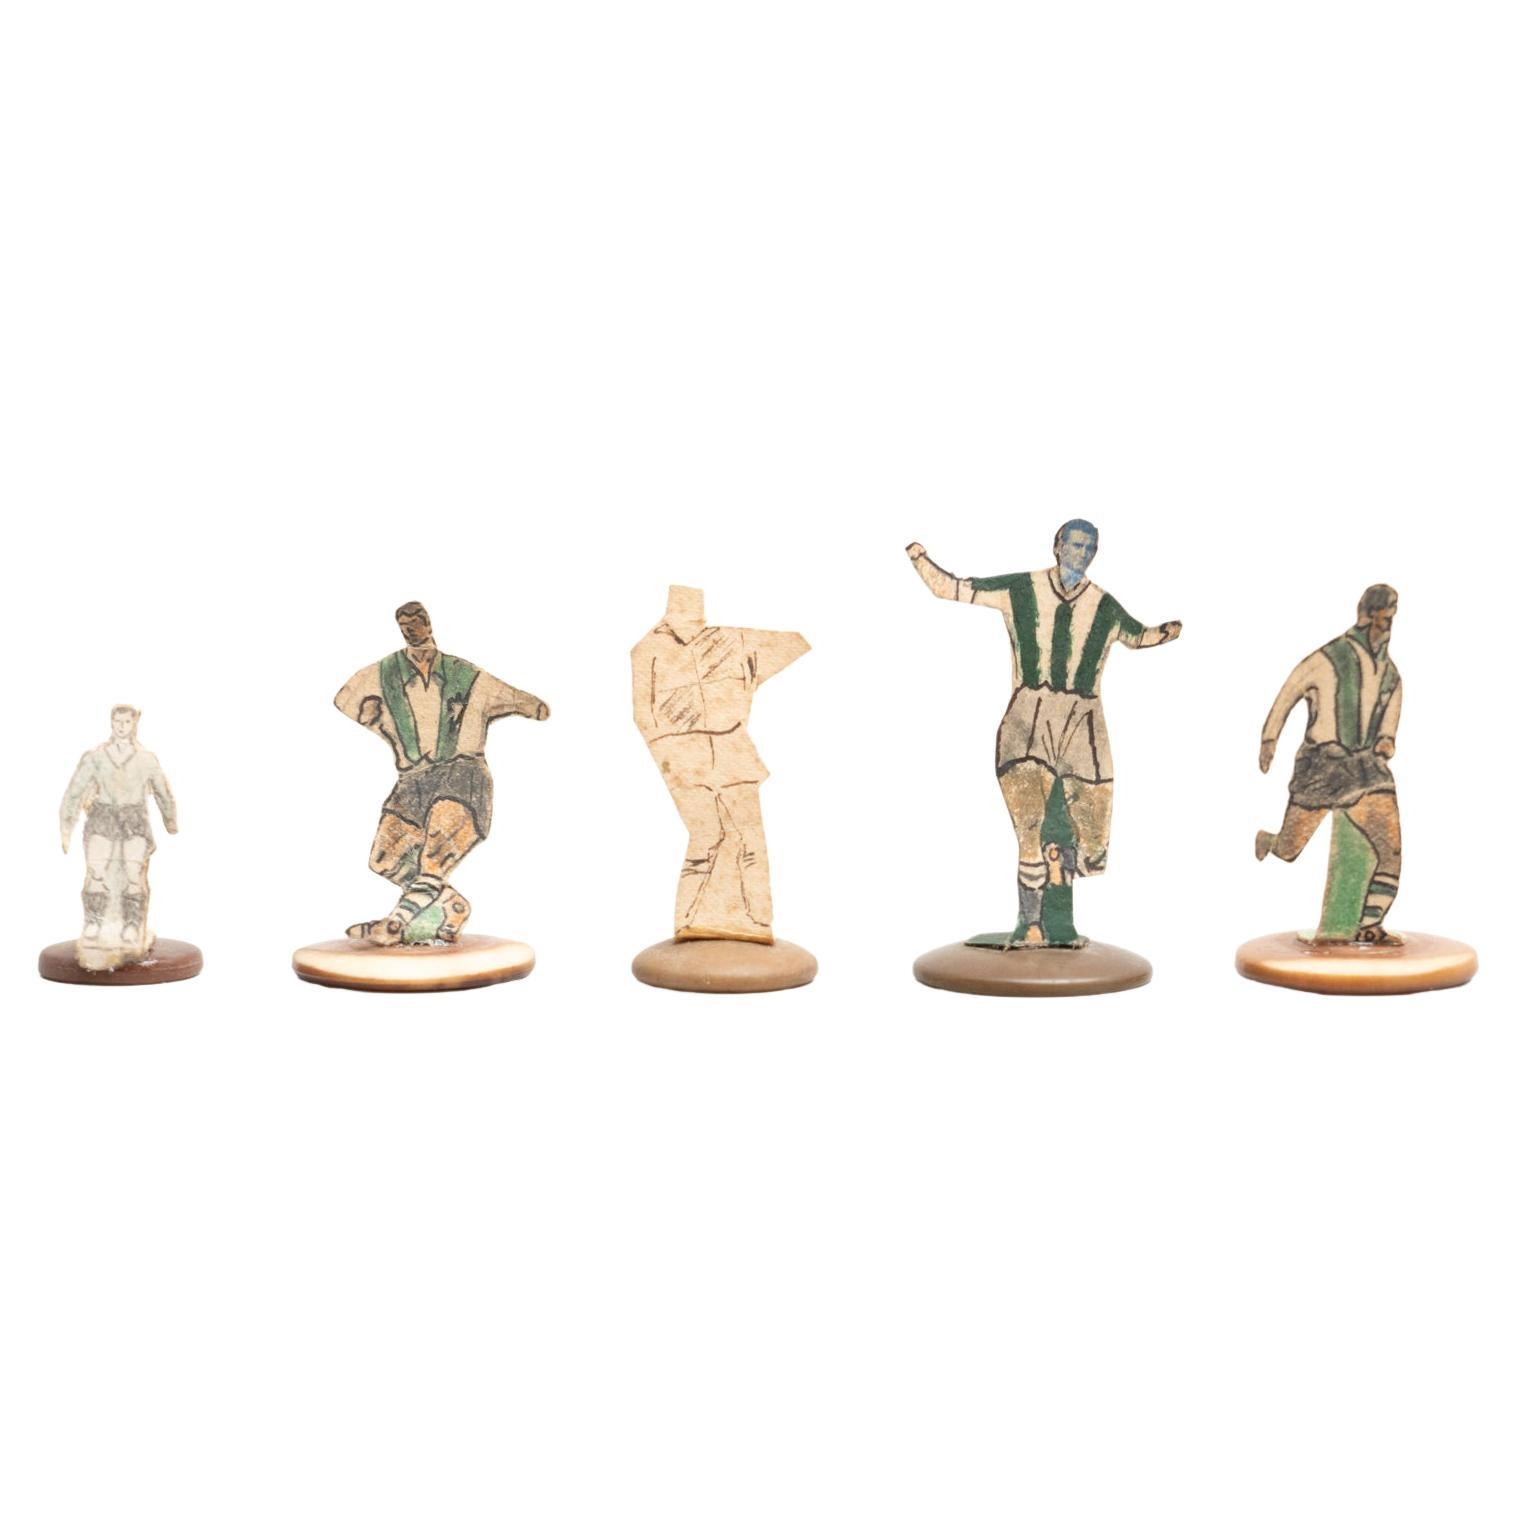 Set of 5 Traditional Antique Button Soccer Game Figures, circa 1950 For Sale